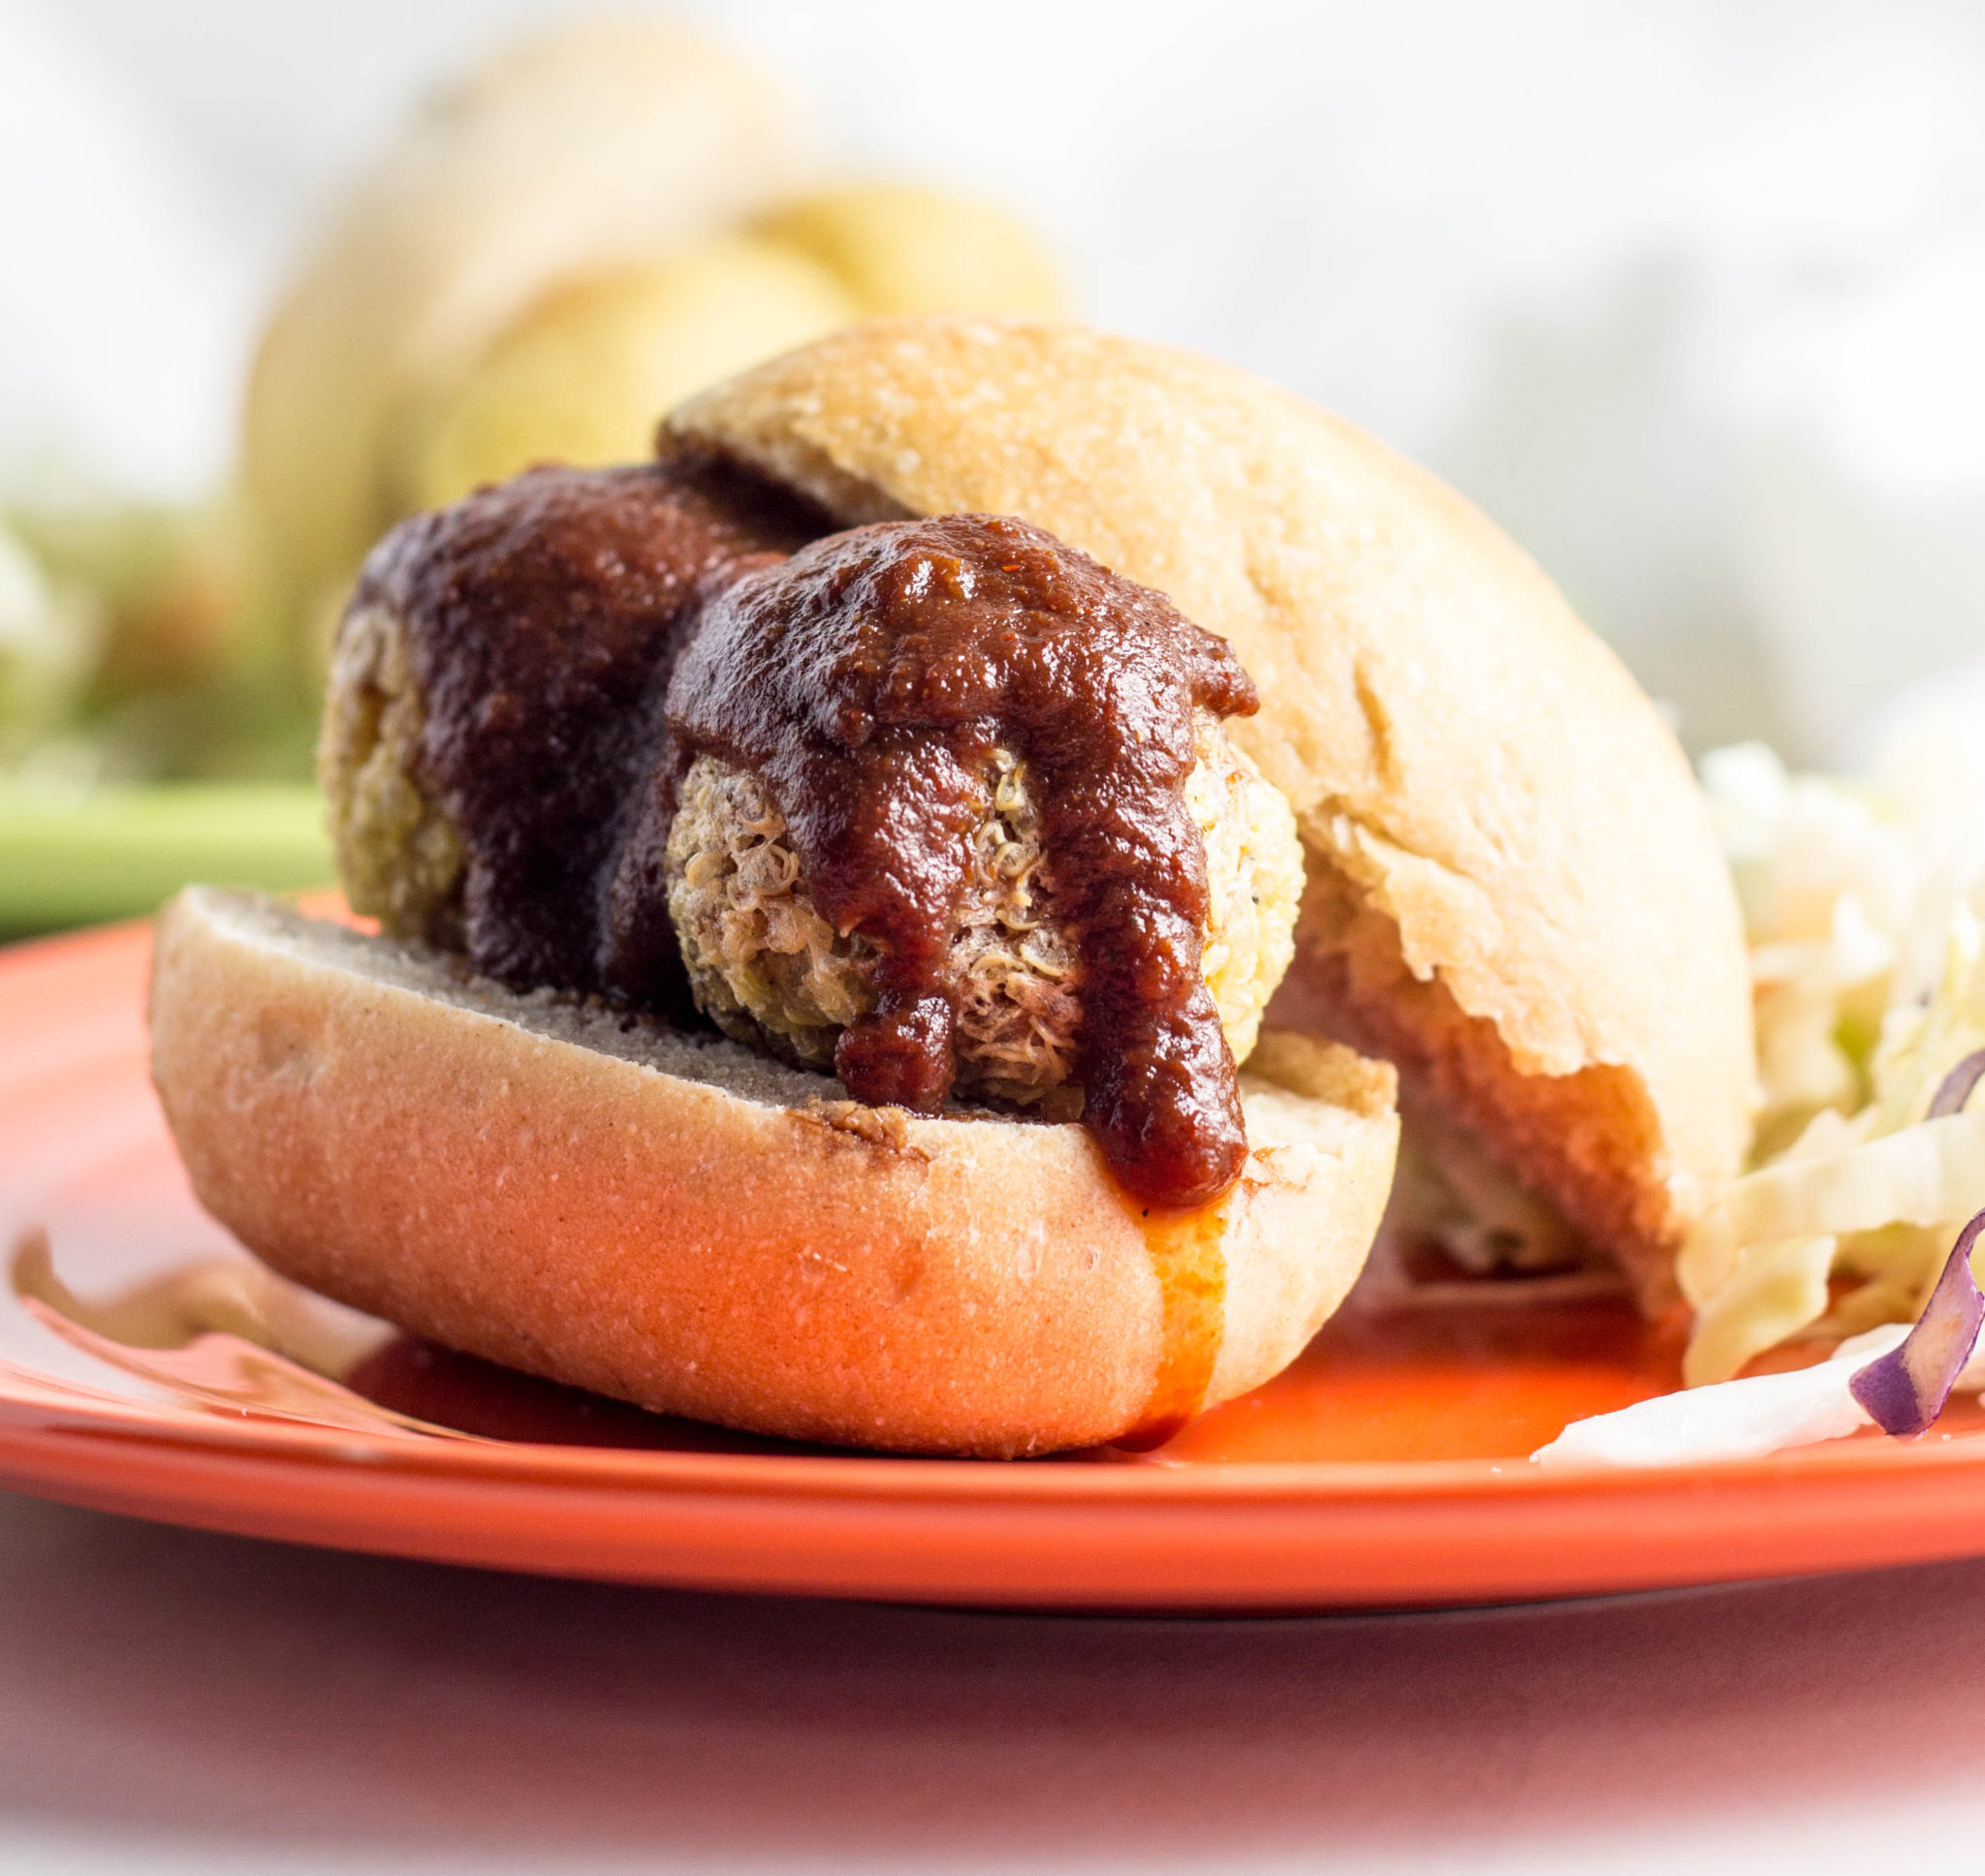 Vegan Barbecue Quinoa Ball Sliders-Baked until crispy on the outside and topped with your favorite barbecue sauce, these BBQ Quinoa Ball Sliders make a great appetizer or add your favorite sides for a complete barbecue dinner. Vegan and naturally gluten free so everyone can enjoy! 